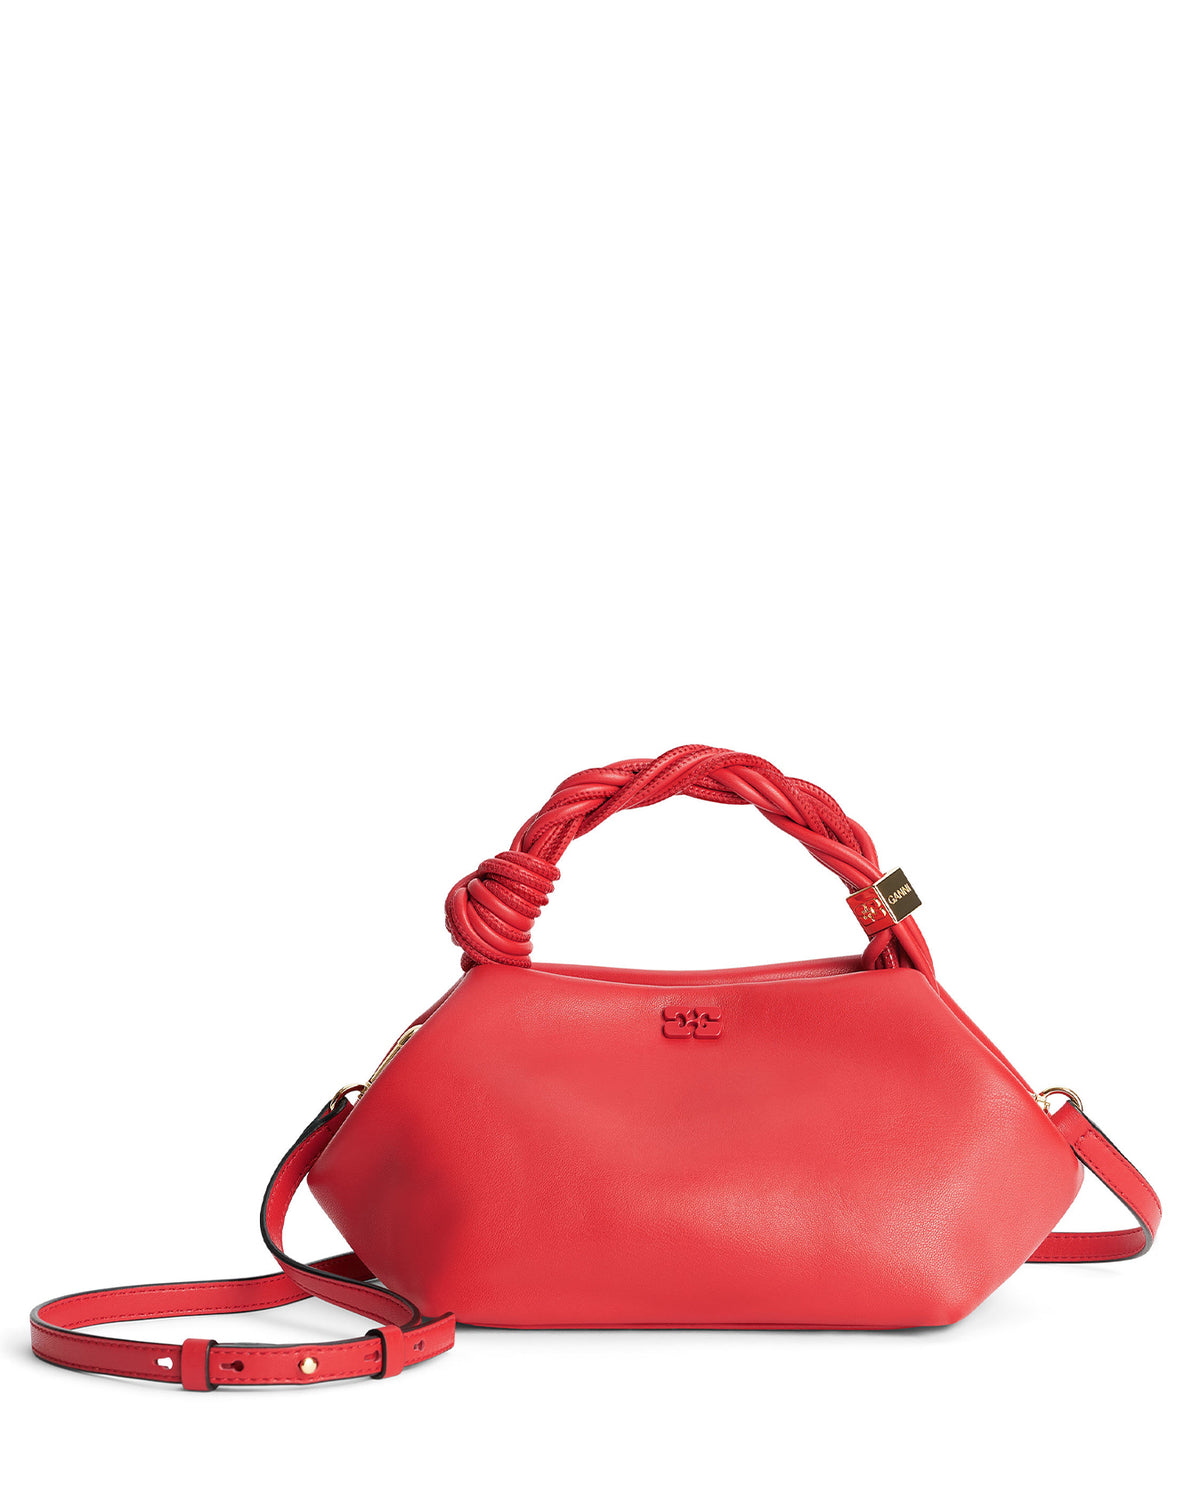 Ganni Bou Bag Small - Fiery Red